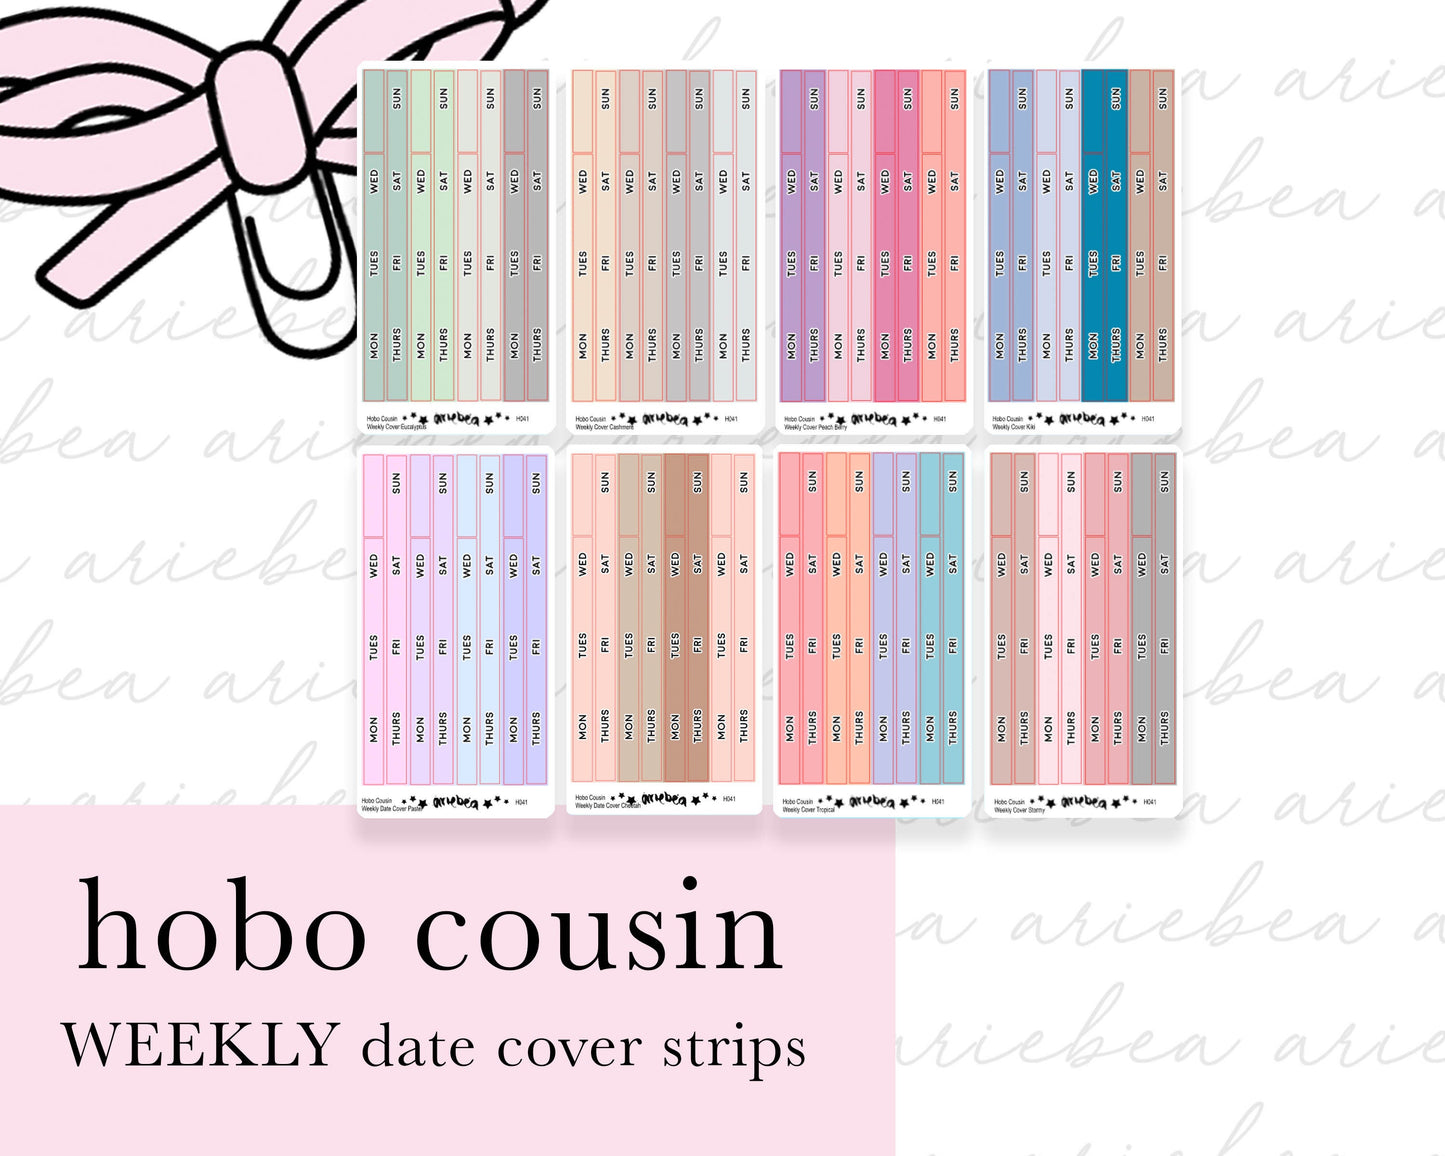 Weekly Hobonichi Cousin Date Cover Strips Planner Stickers